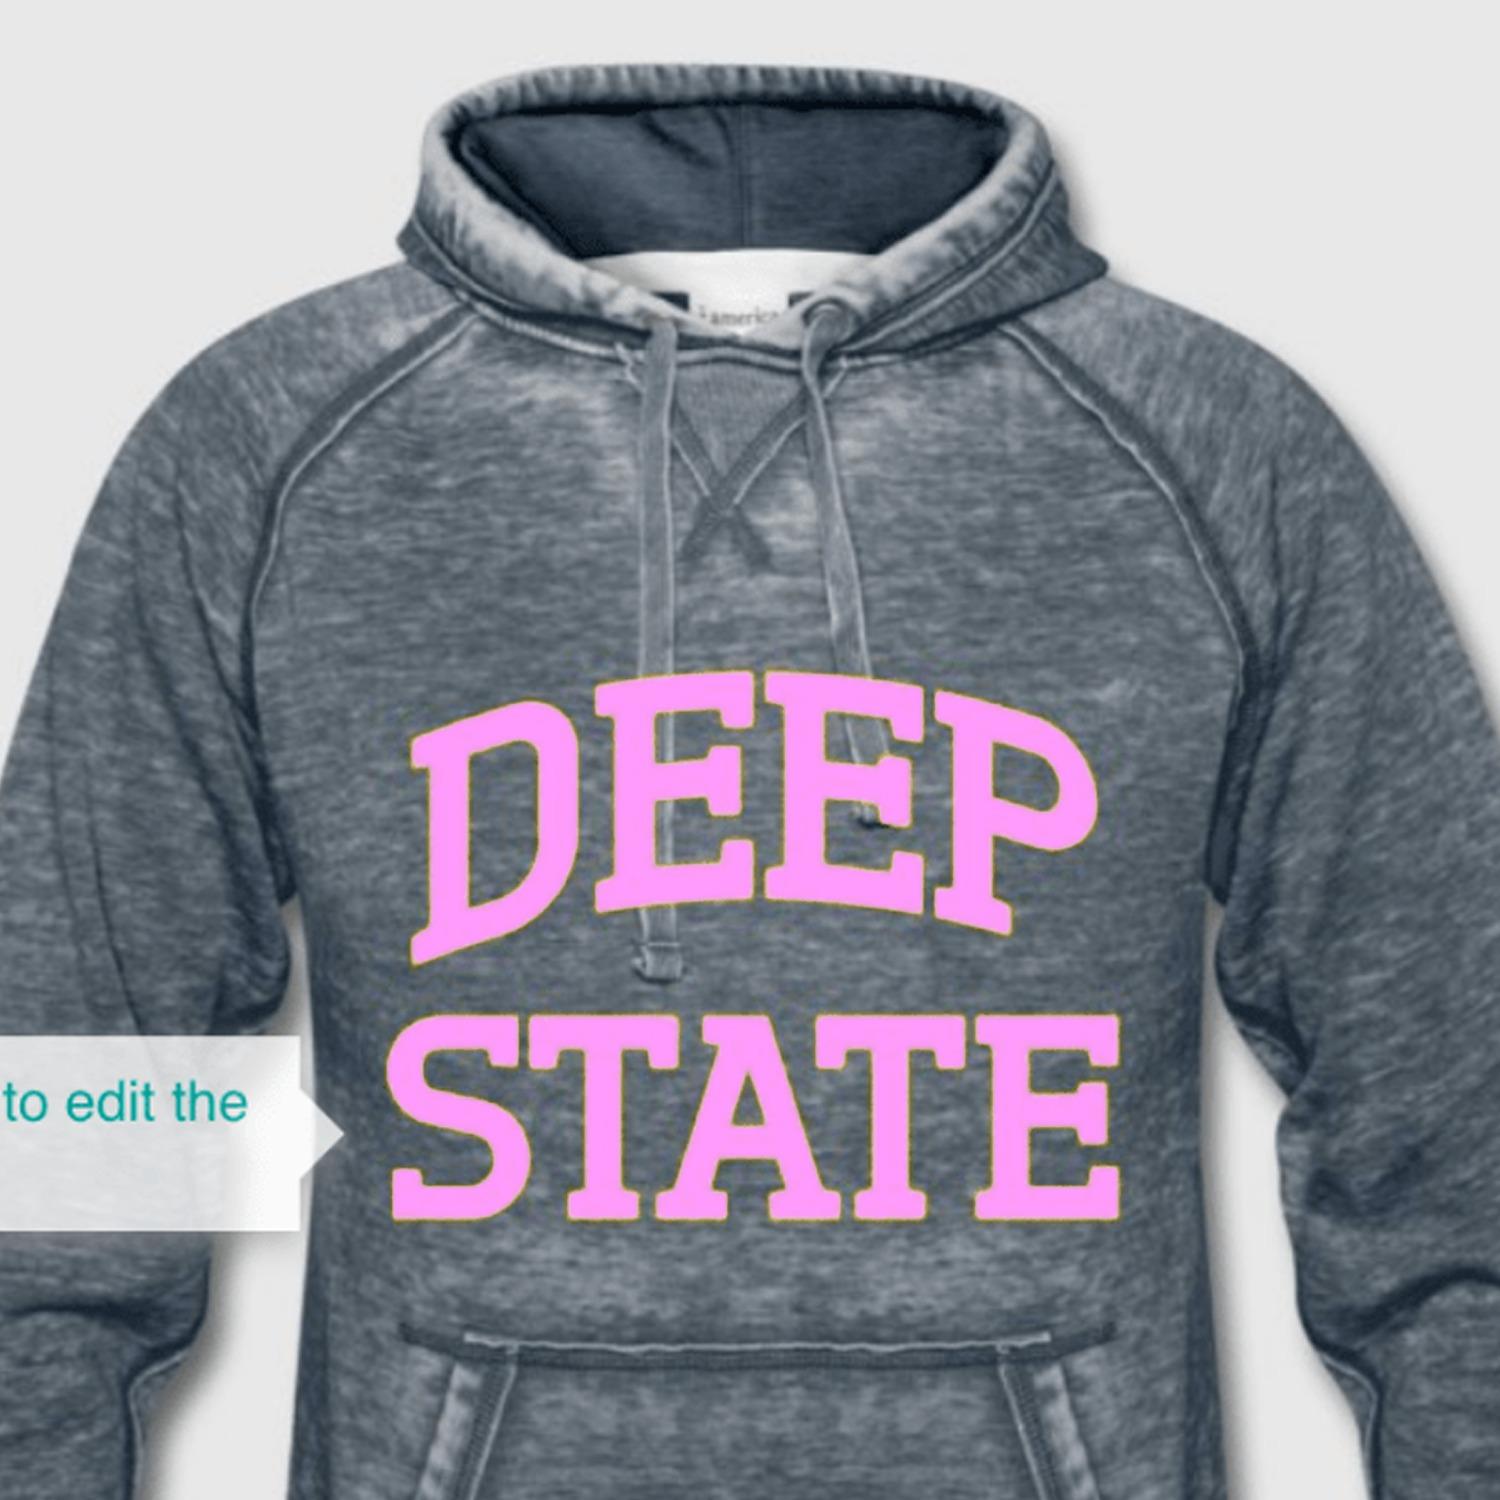 Thumbnail for "Deep State Revisited".